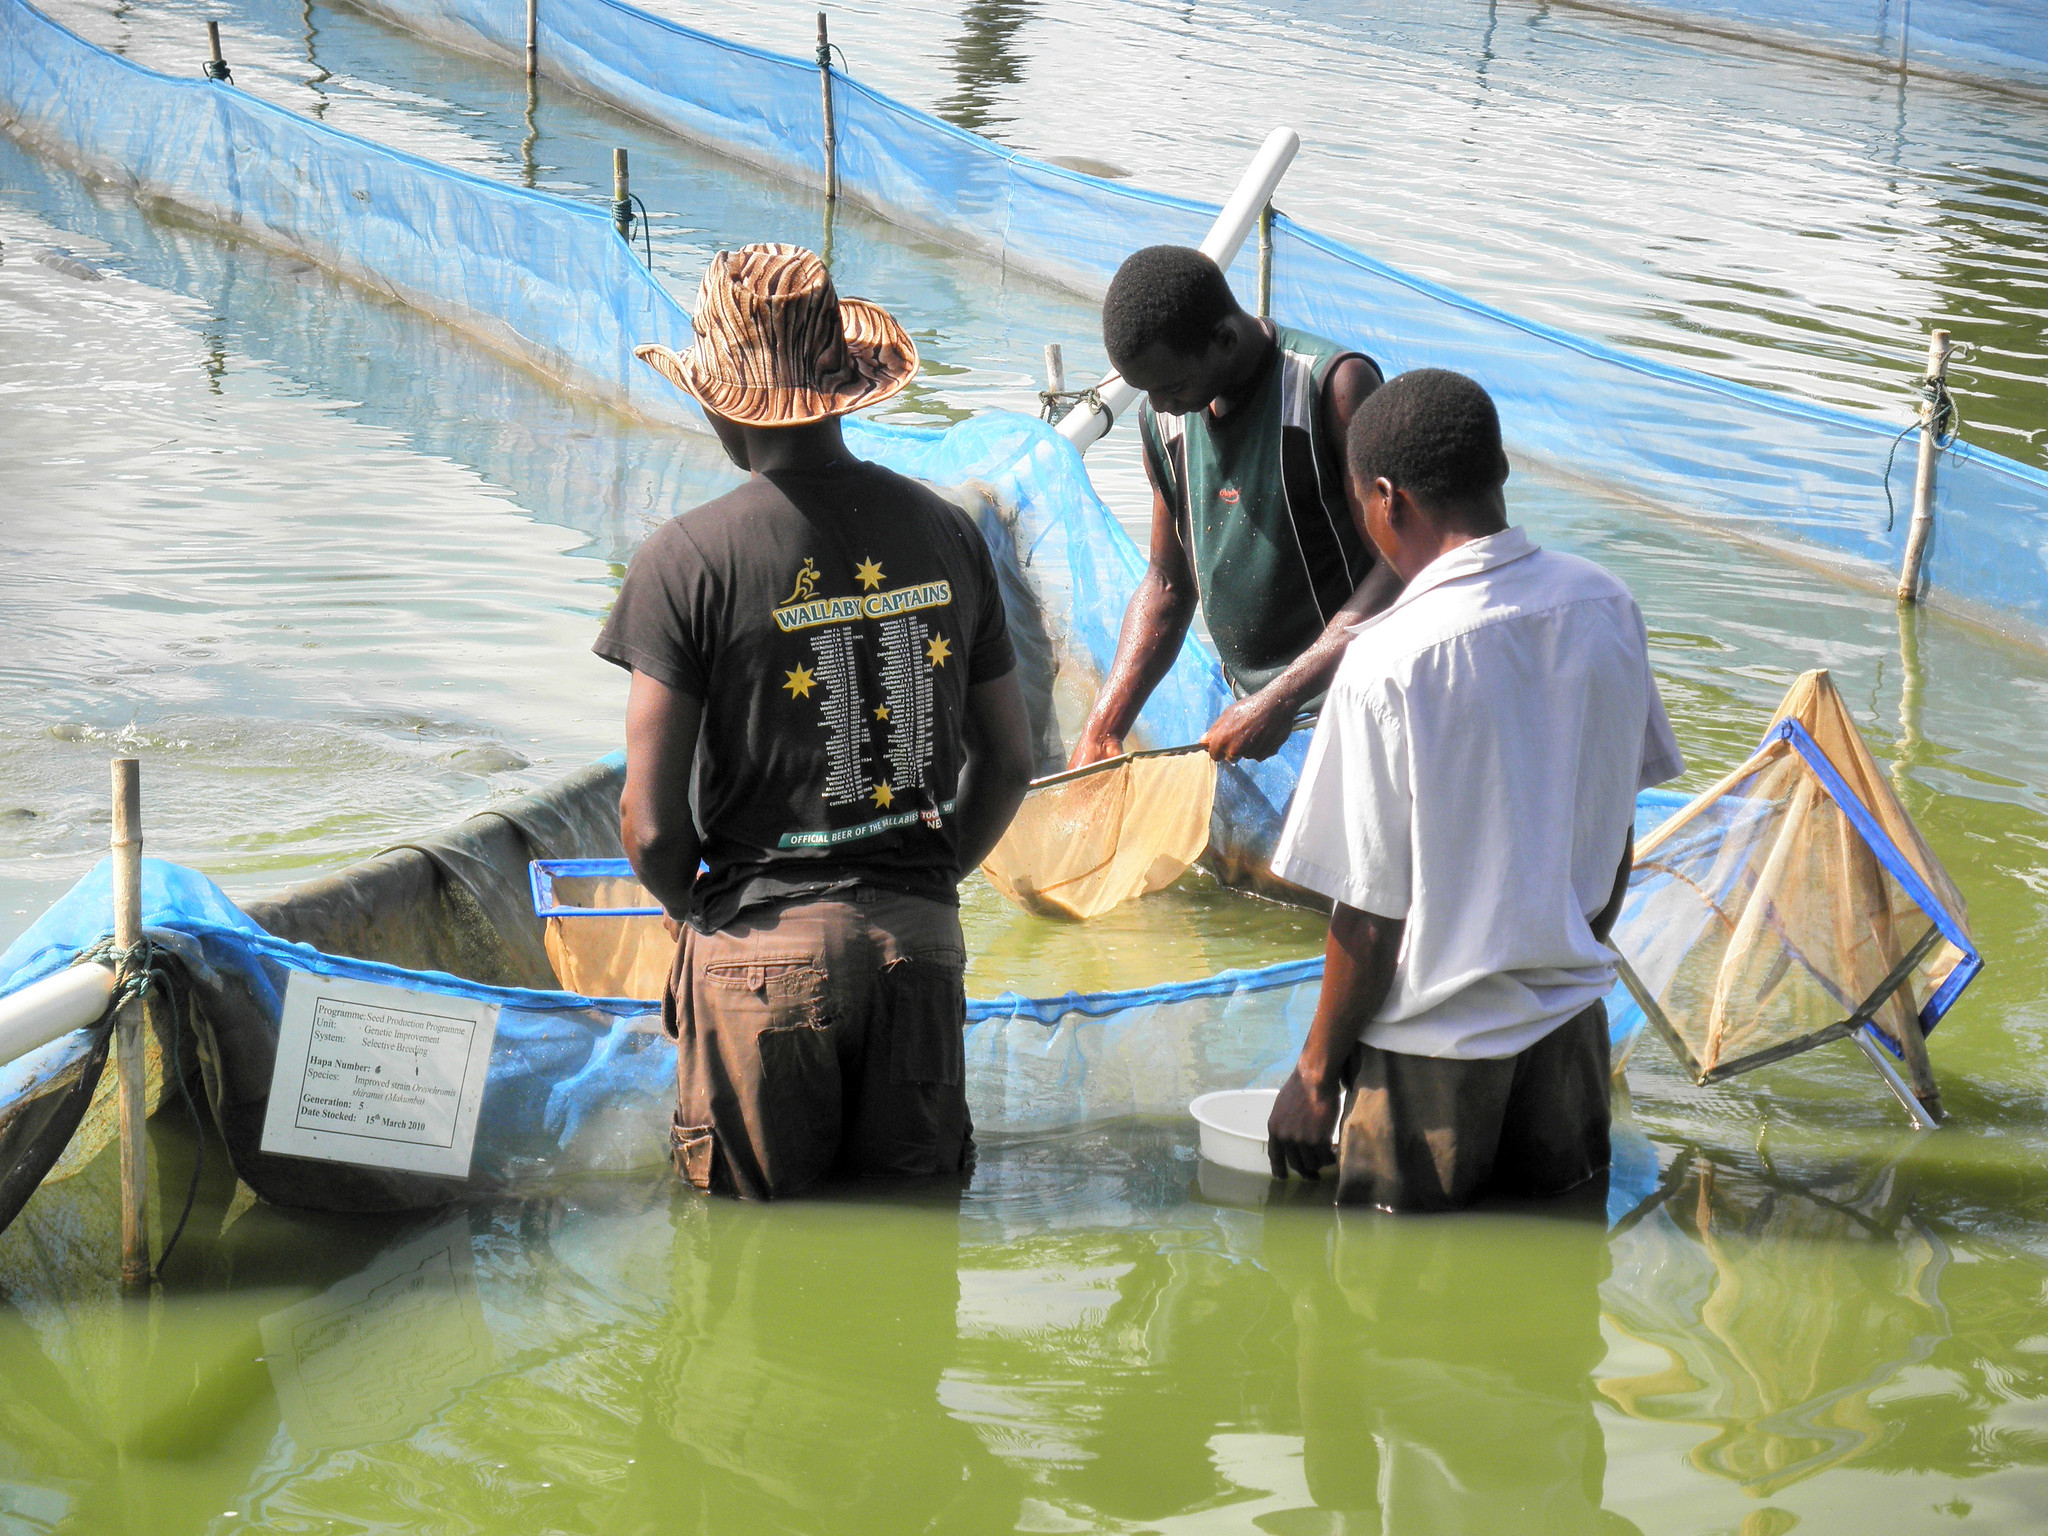 Collecting fish seed at the National Aquaculture Centre in Domasi, Malawi. Photo by Asafu Chijere.